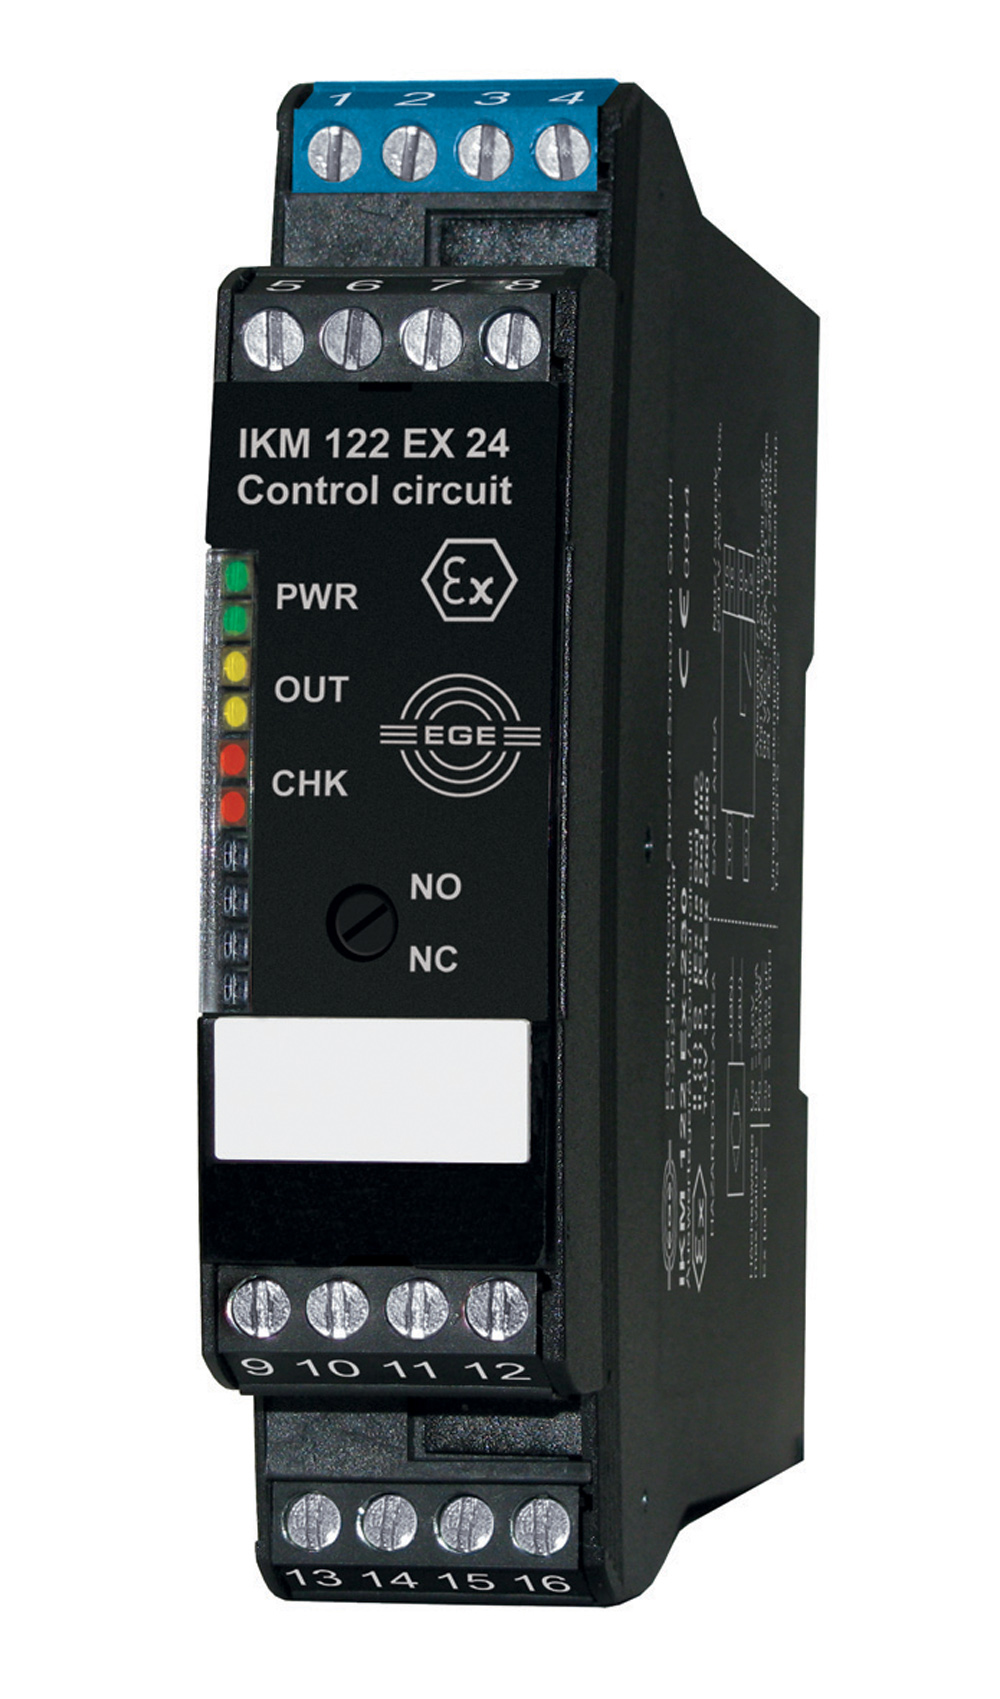 EGE now offers IECEx-certified signal processing units for IECEx-approved two-wire sensors